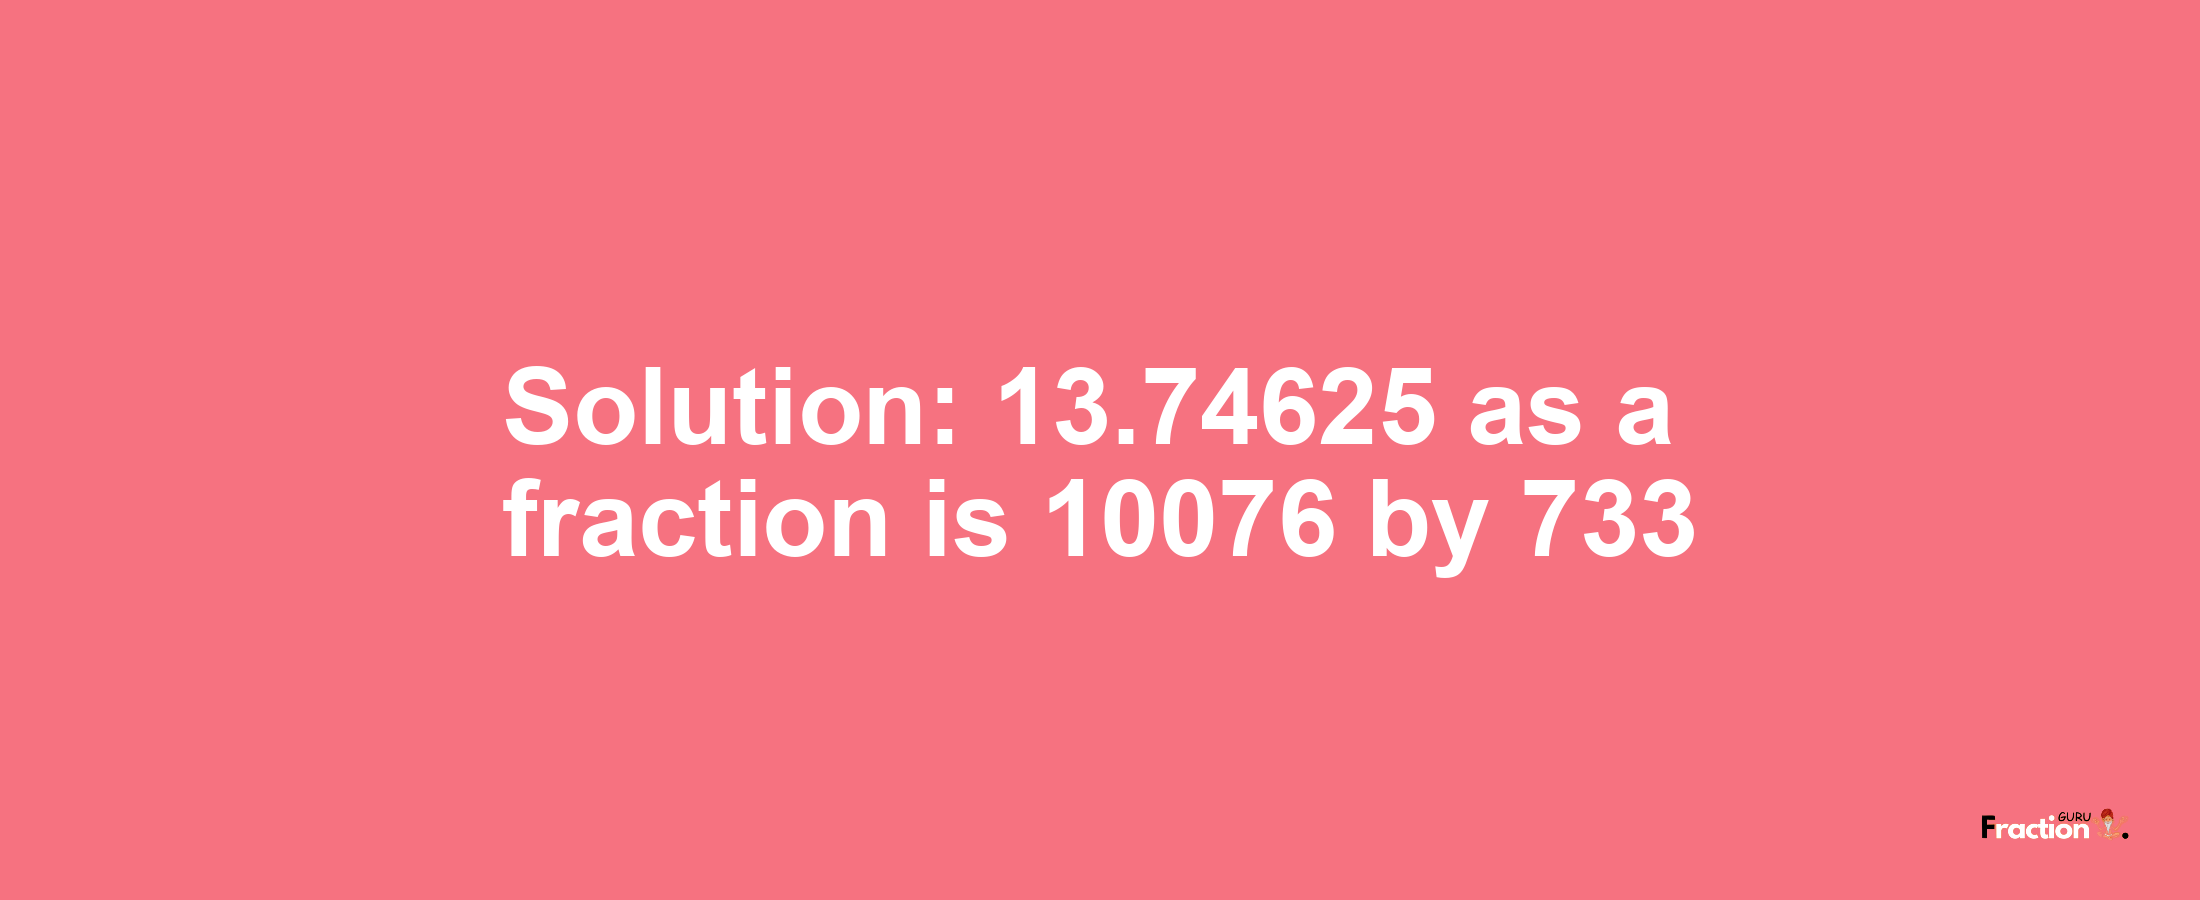 Solution:13.74625 as a fraction is 10076/733